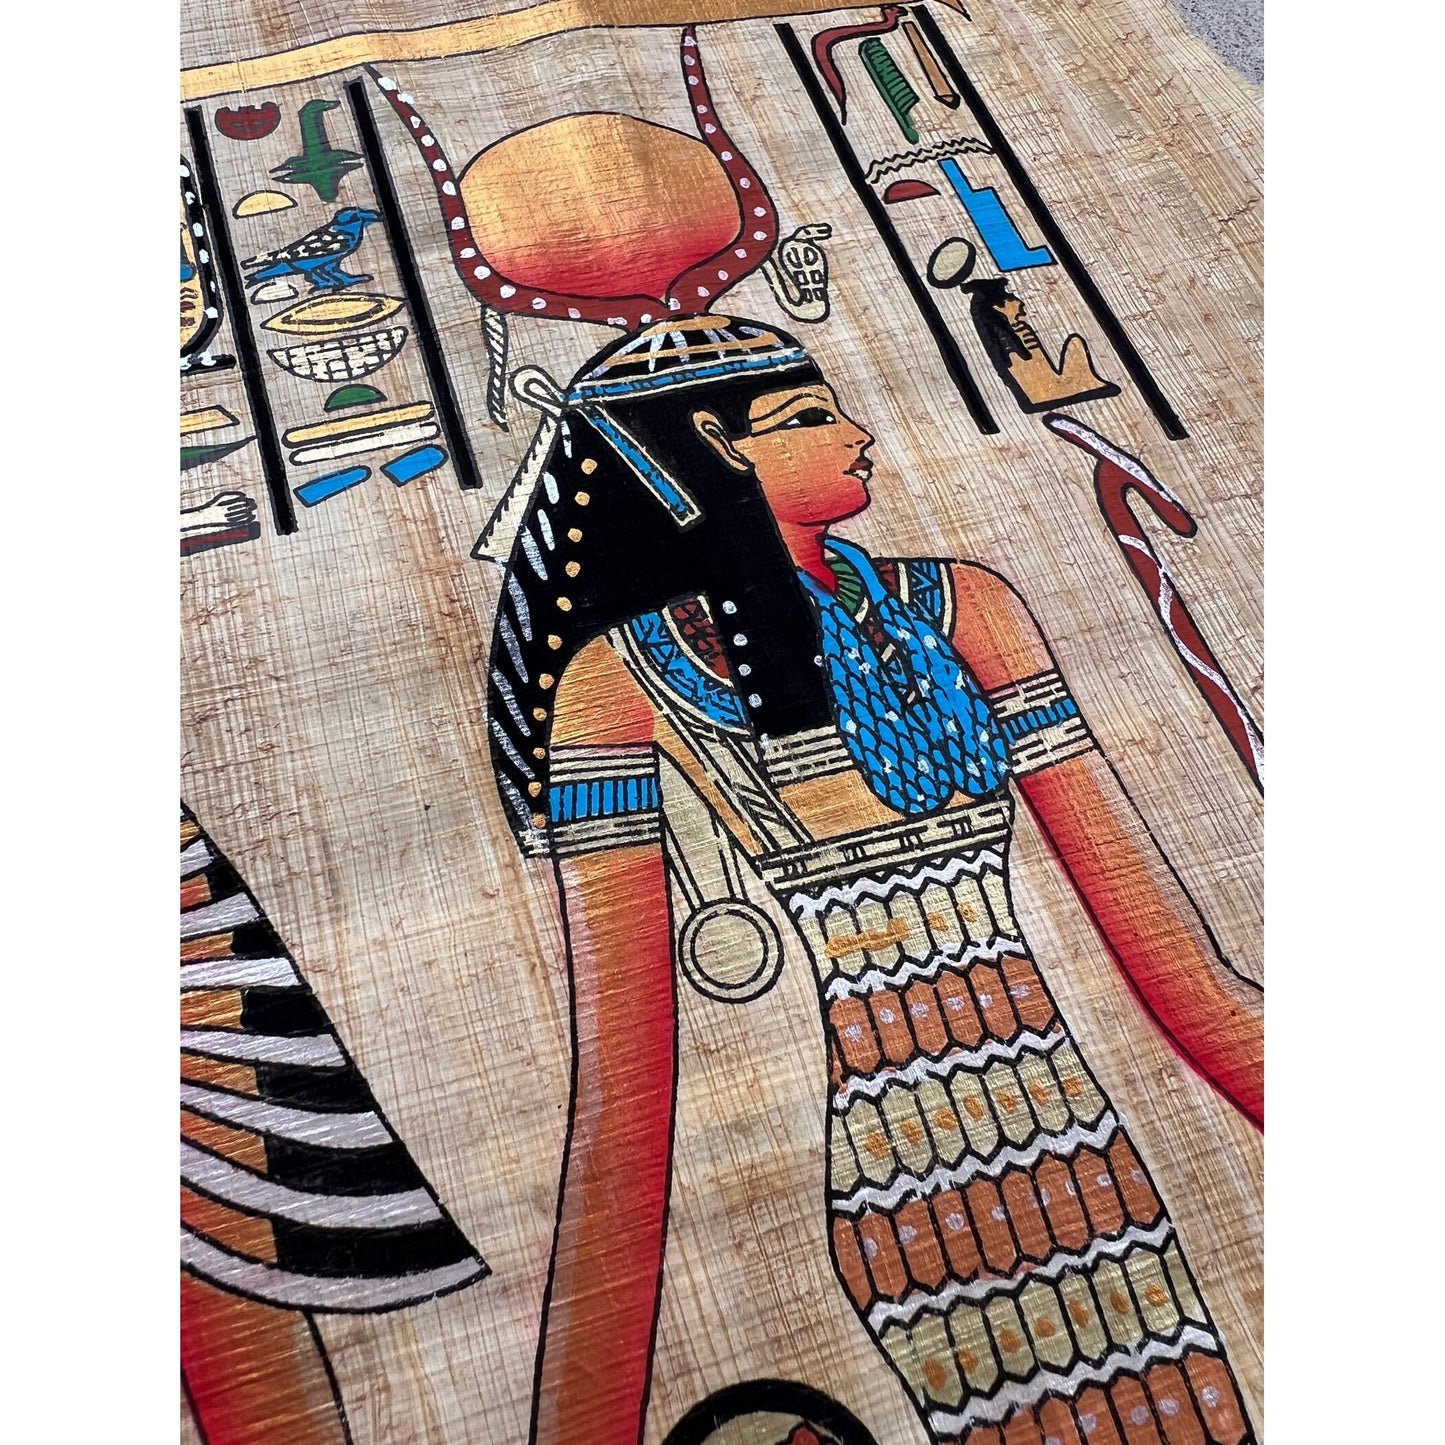 Isis Leading Queen Nefertari - Place in The Sacred Land Masterpiece Story - Egyptian Hand Painted Papyrus Artwork, Wall Decor- 13x17 Inches